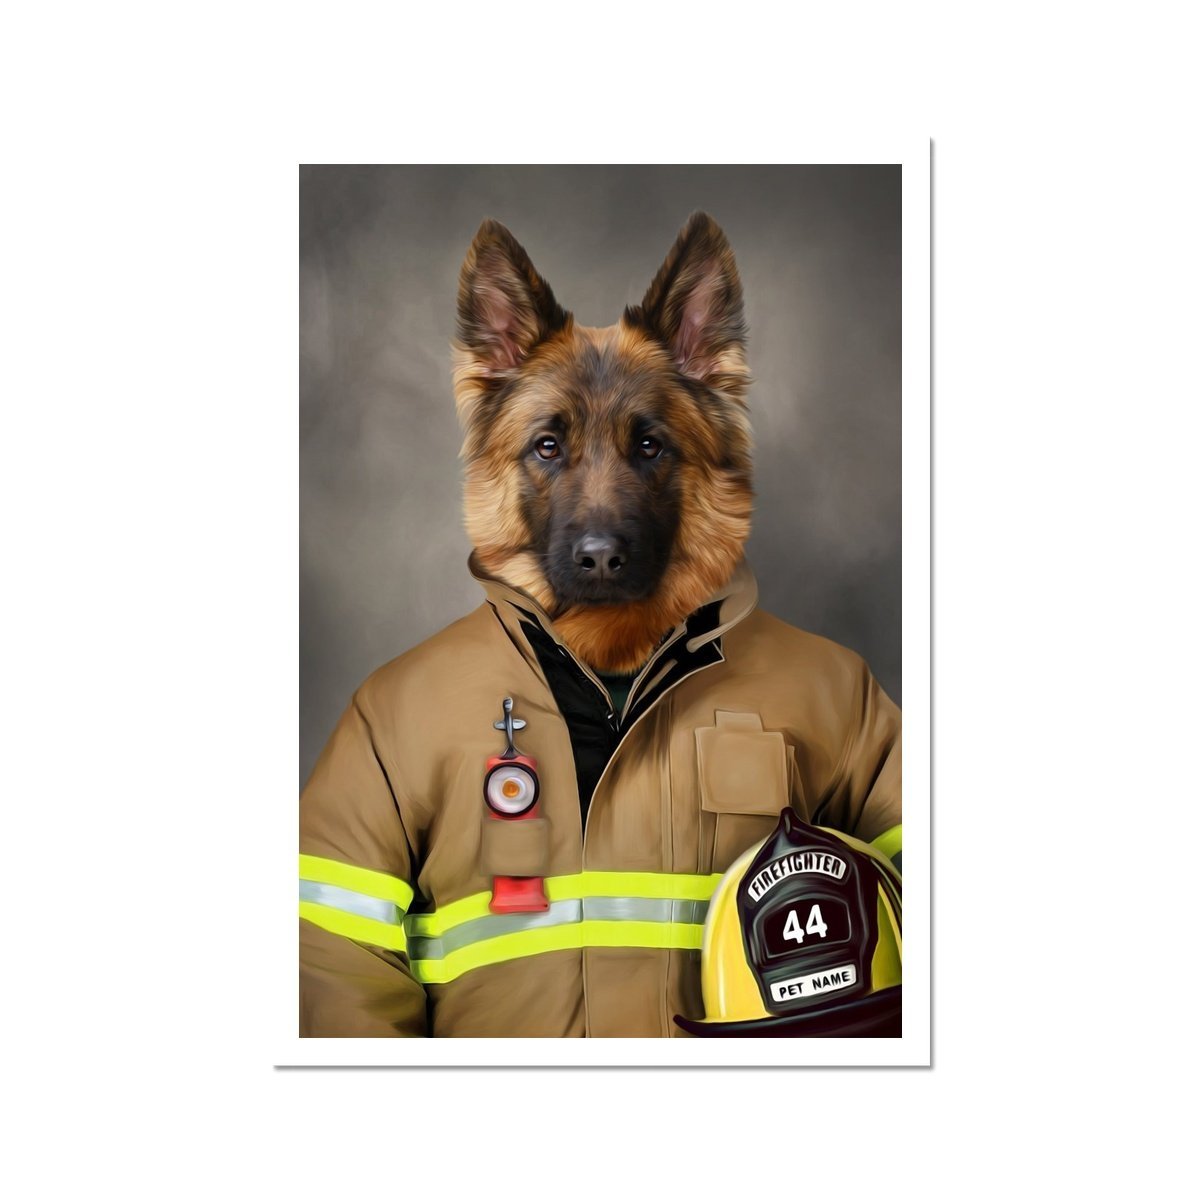 The Firefighter: Custom Pet Poster - Paw & Glory - #pet portraits# - #dog portraits# - #pet portraits uk#Paw & Glory, paw and glory, paintings of pets in costumes posters dog, personalised dog poster custom pet portrait, best dog portrait pet portraits old fashioned pet portrait